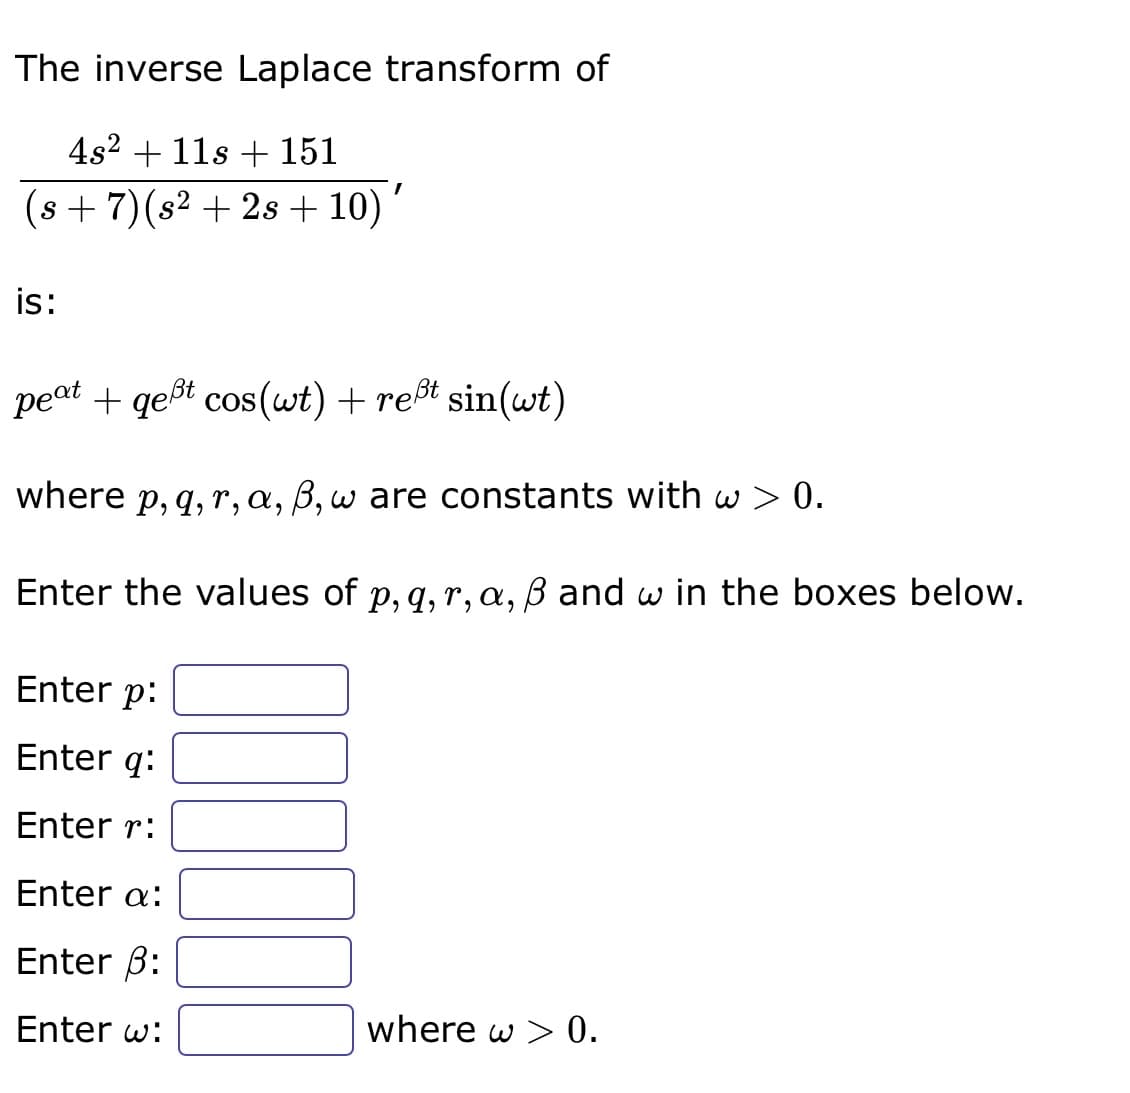 The inverse Laplace transform of
4s² + 11s + 151
(s + 7) (s² + 2s + 10) '
is:
peat + gest cos(wt) + reßt sin(wt)
where p, q, r, a, ß, w are constants with w> 0.
Enter the values of p, q, r, a, ß and w in the boxes below.
Enter p:
Enter q:
Enter r:
Enter a:
Enter ß:
Enter w:
where w > 0.